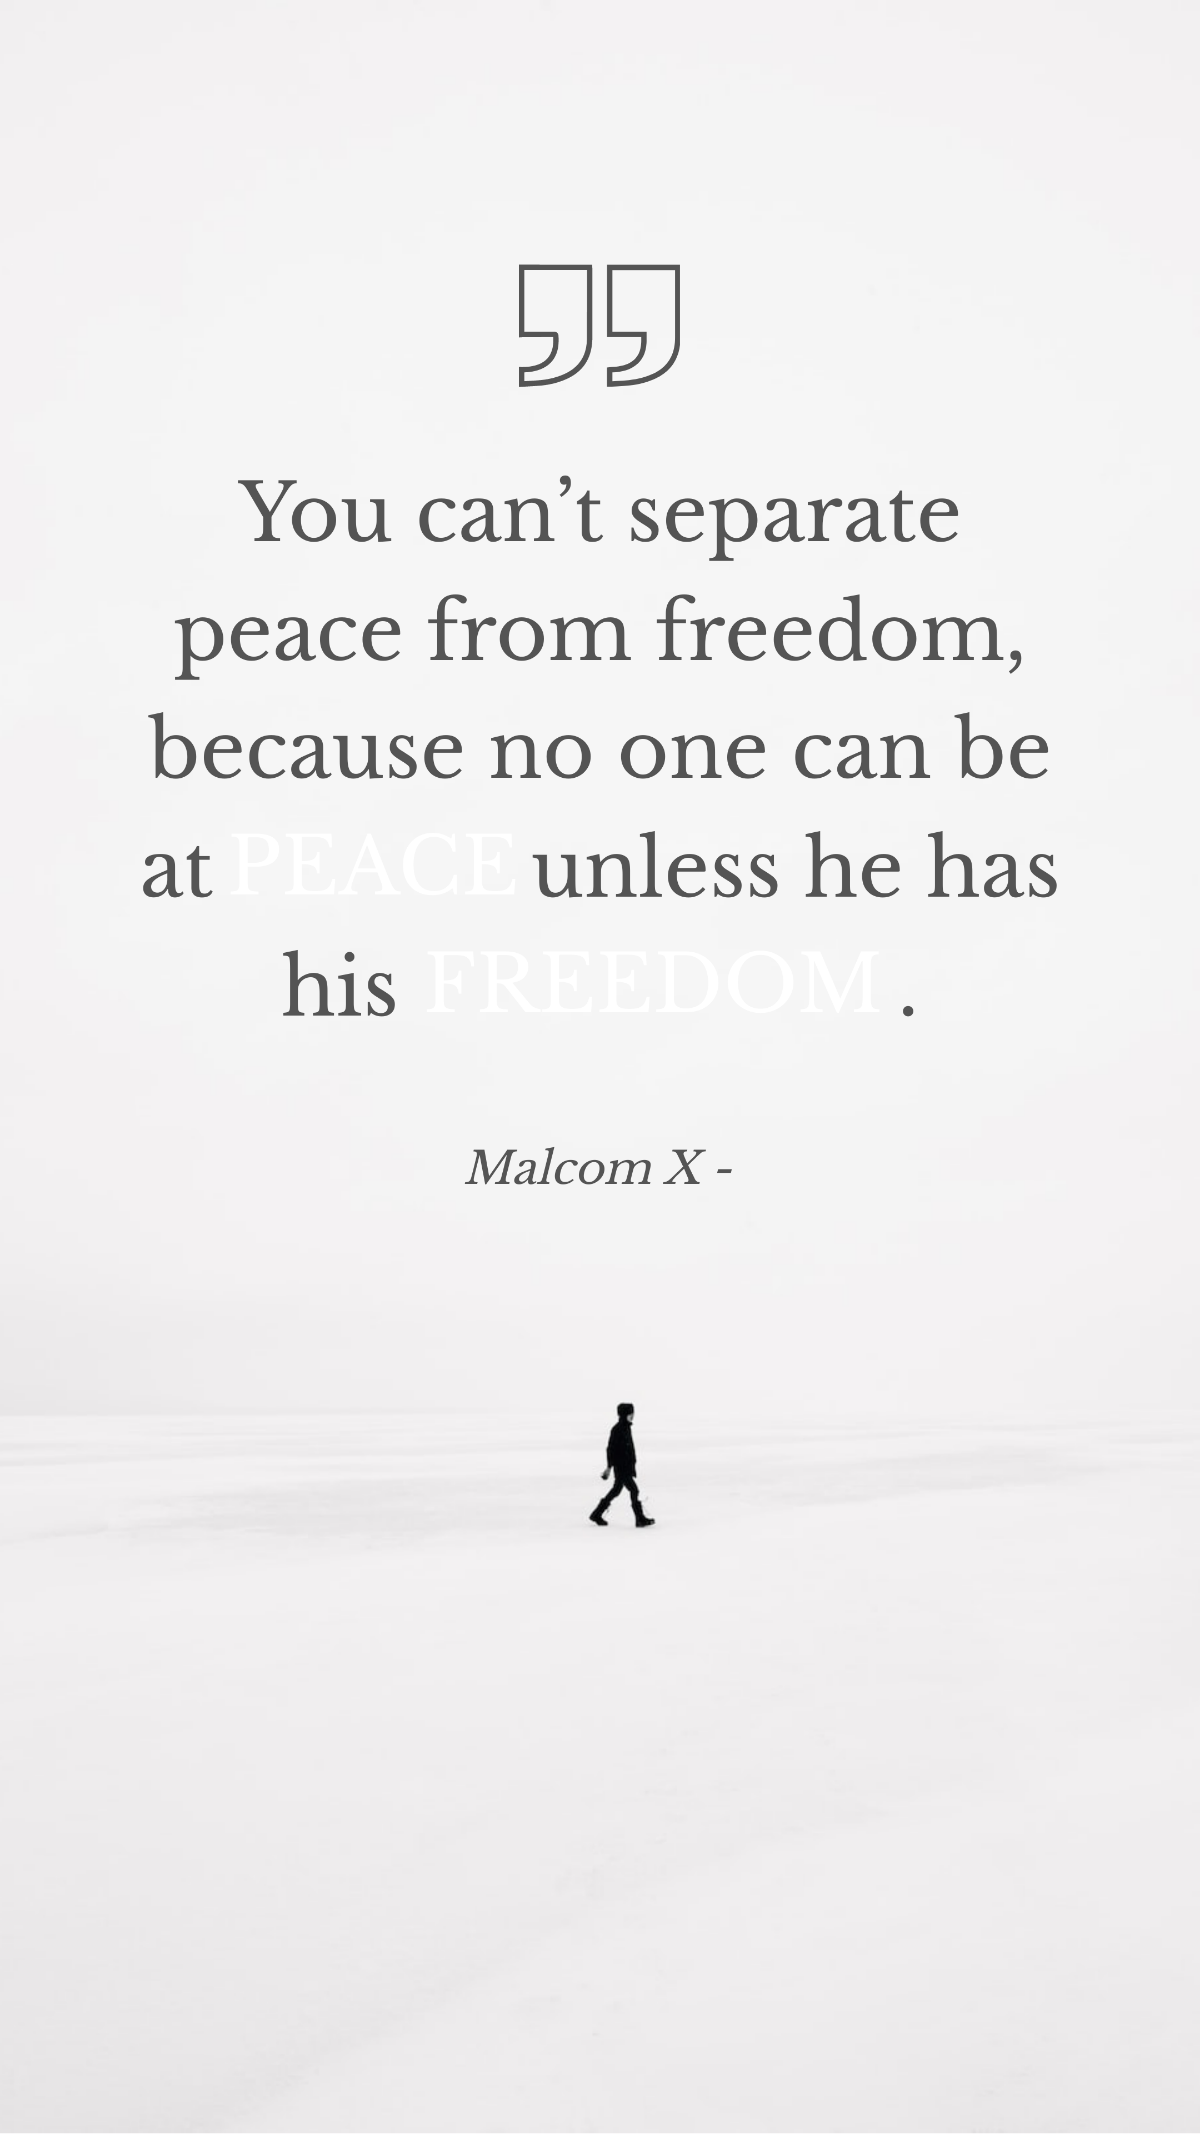 Malcom X - You can’t separate peace from freedom, because no one can be at peace unless he has his freedom. Template